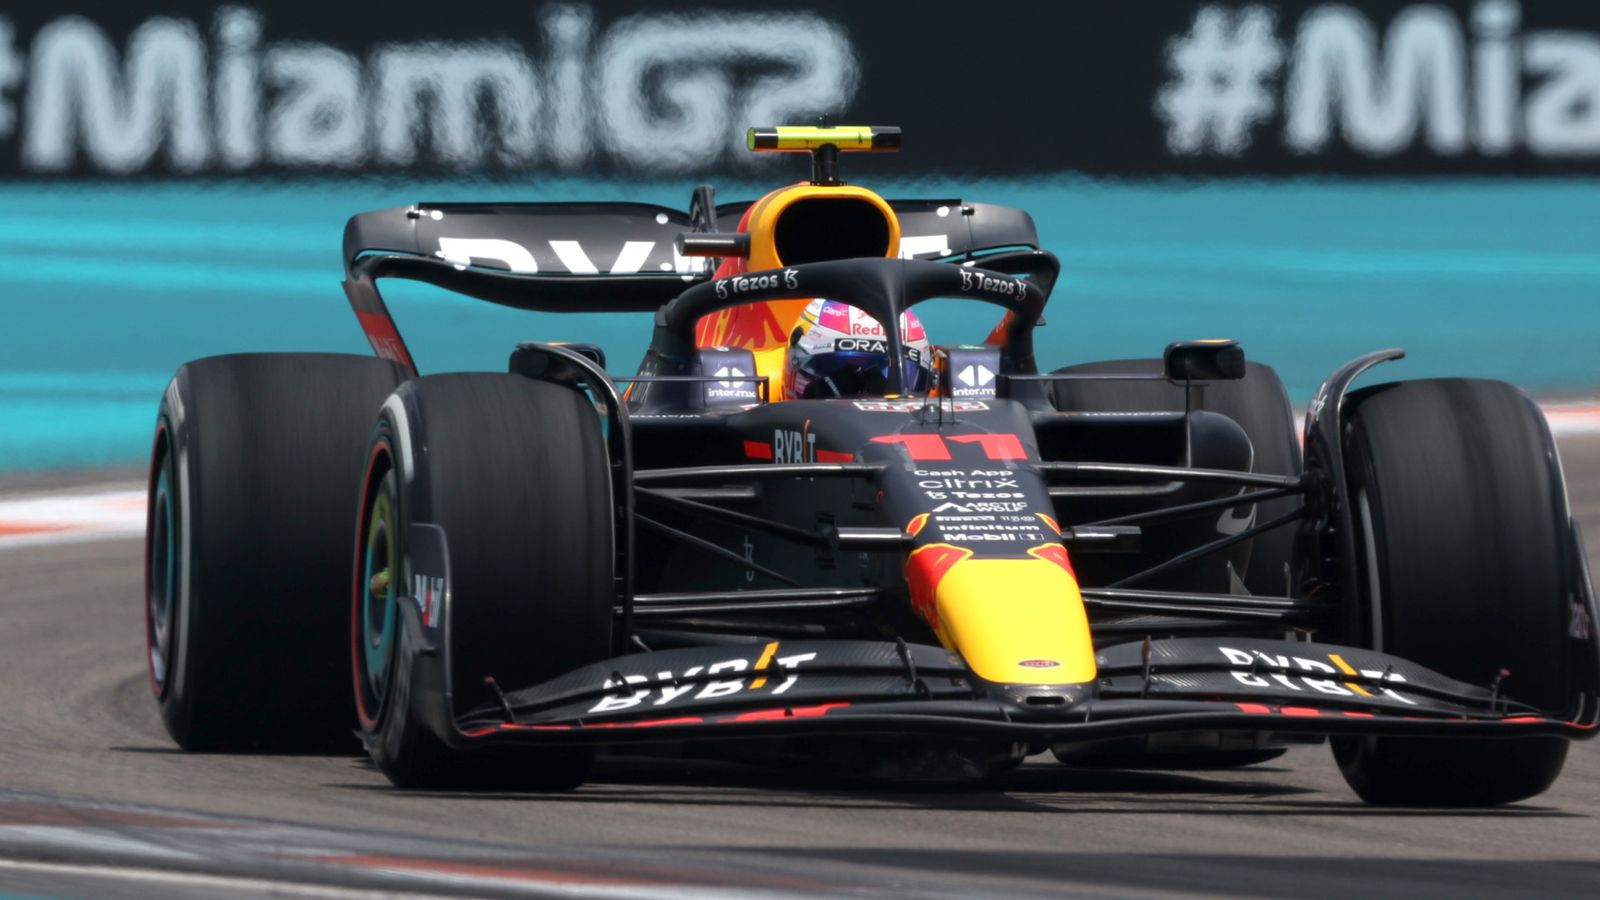 Miami GP: Sergio Perez tops Charles Leclerc and Max Verstappen in Practice Three as Mercedes drop back